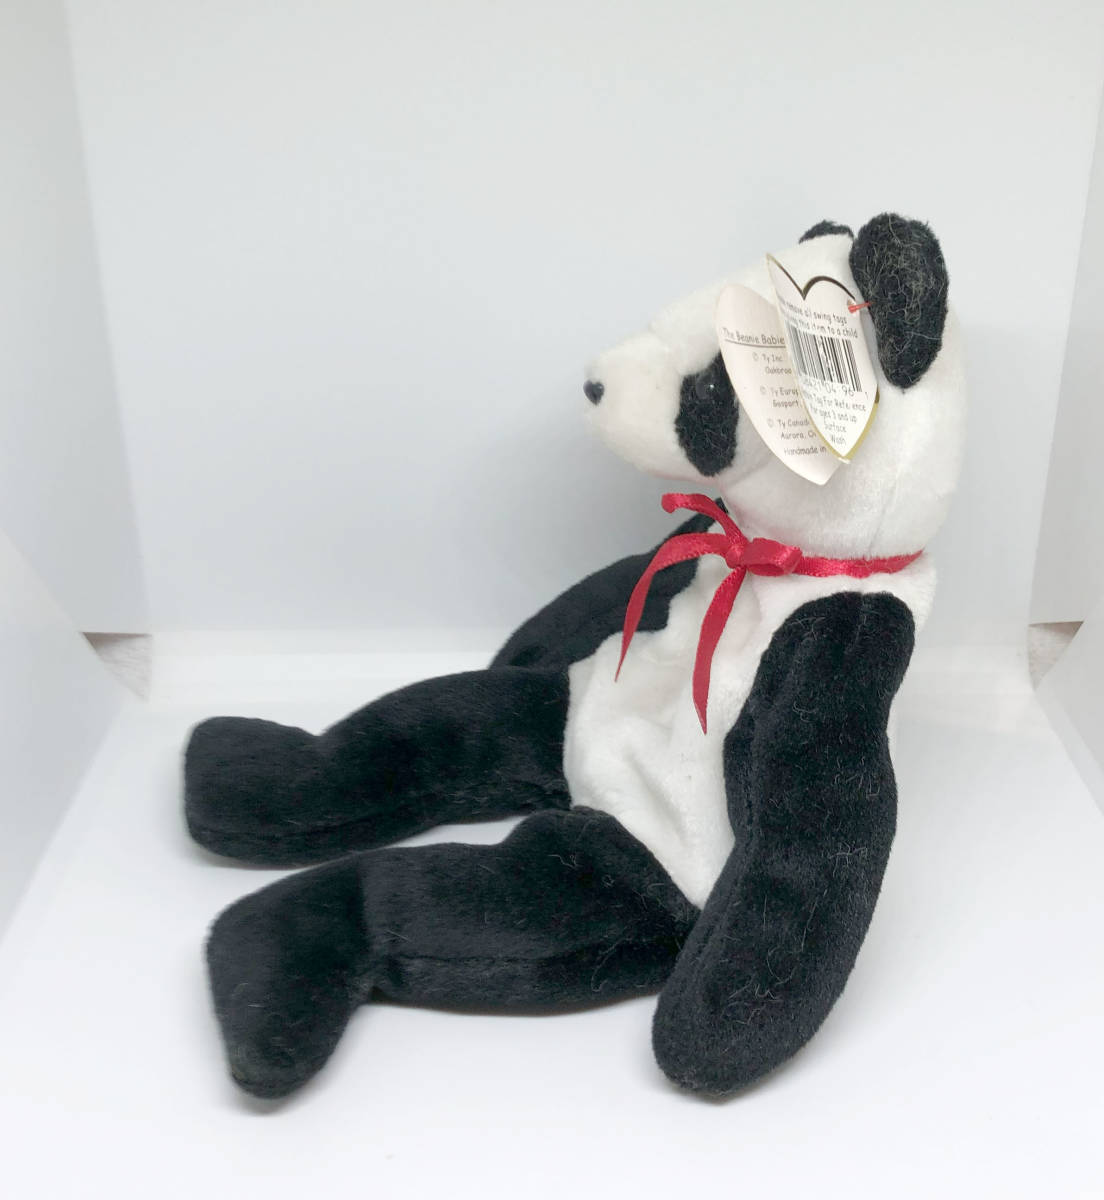 TYbi knee - babes very popular Panda!BEANIE BABIES Fortune. tag case less!